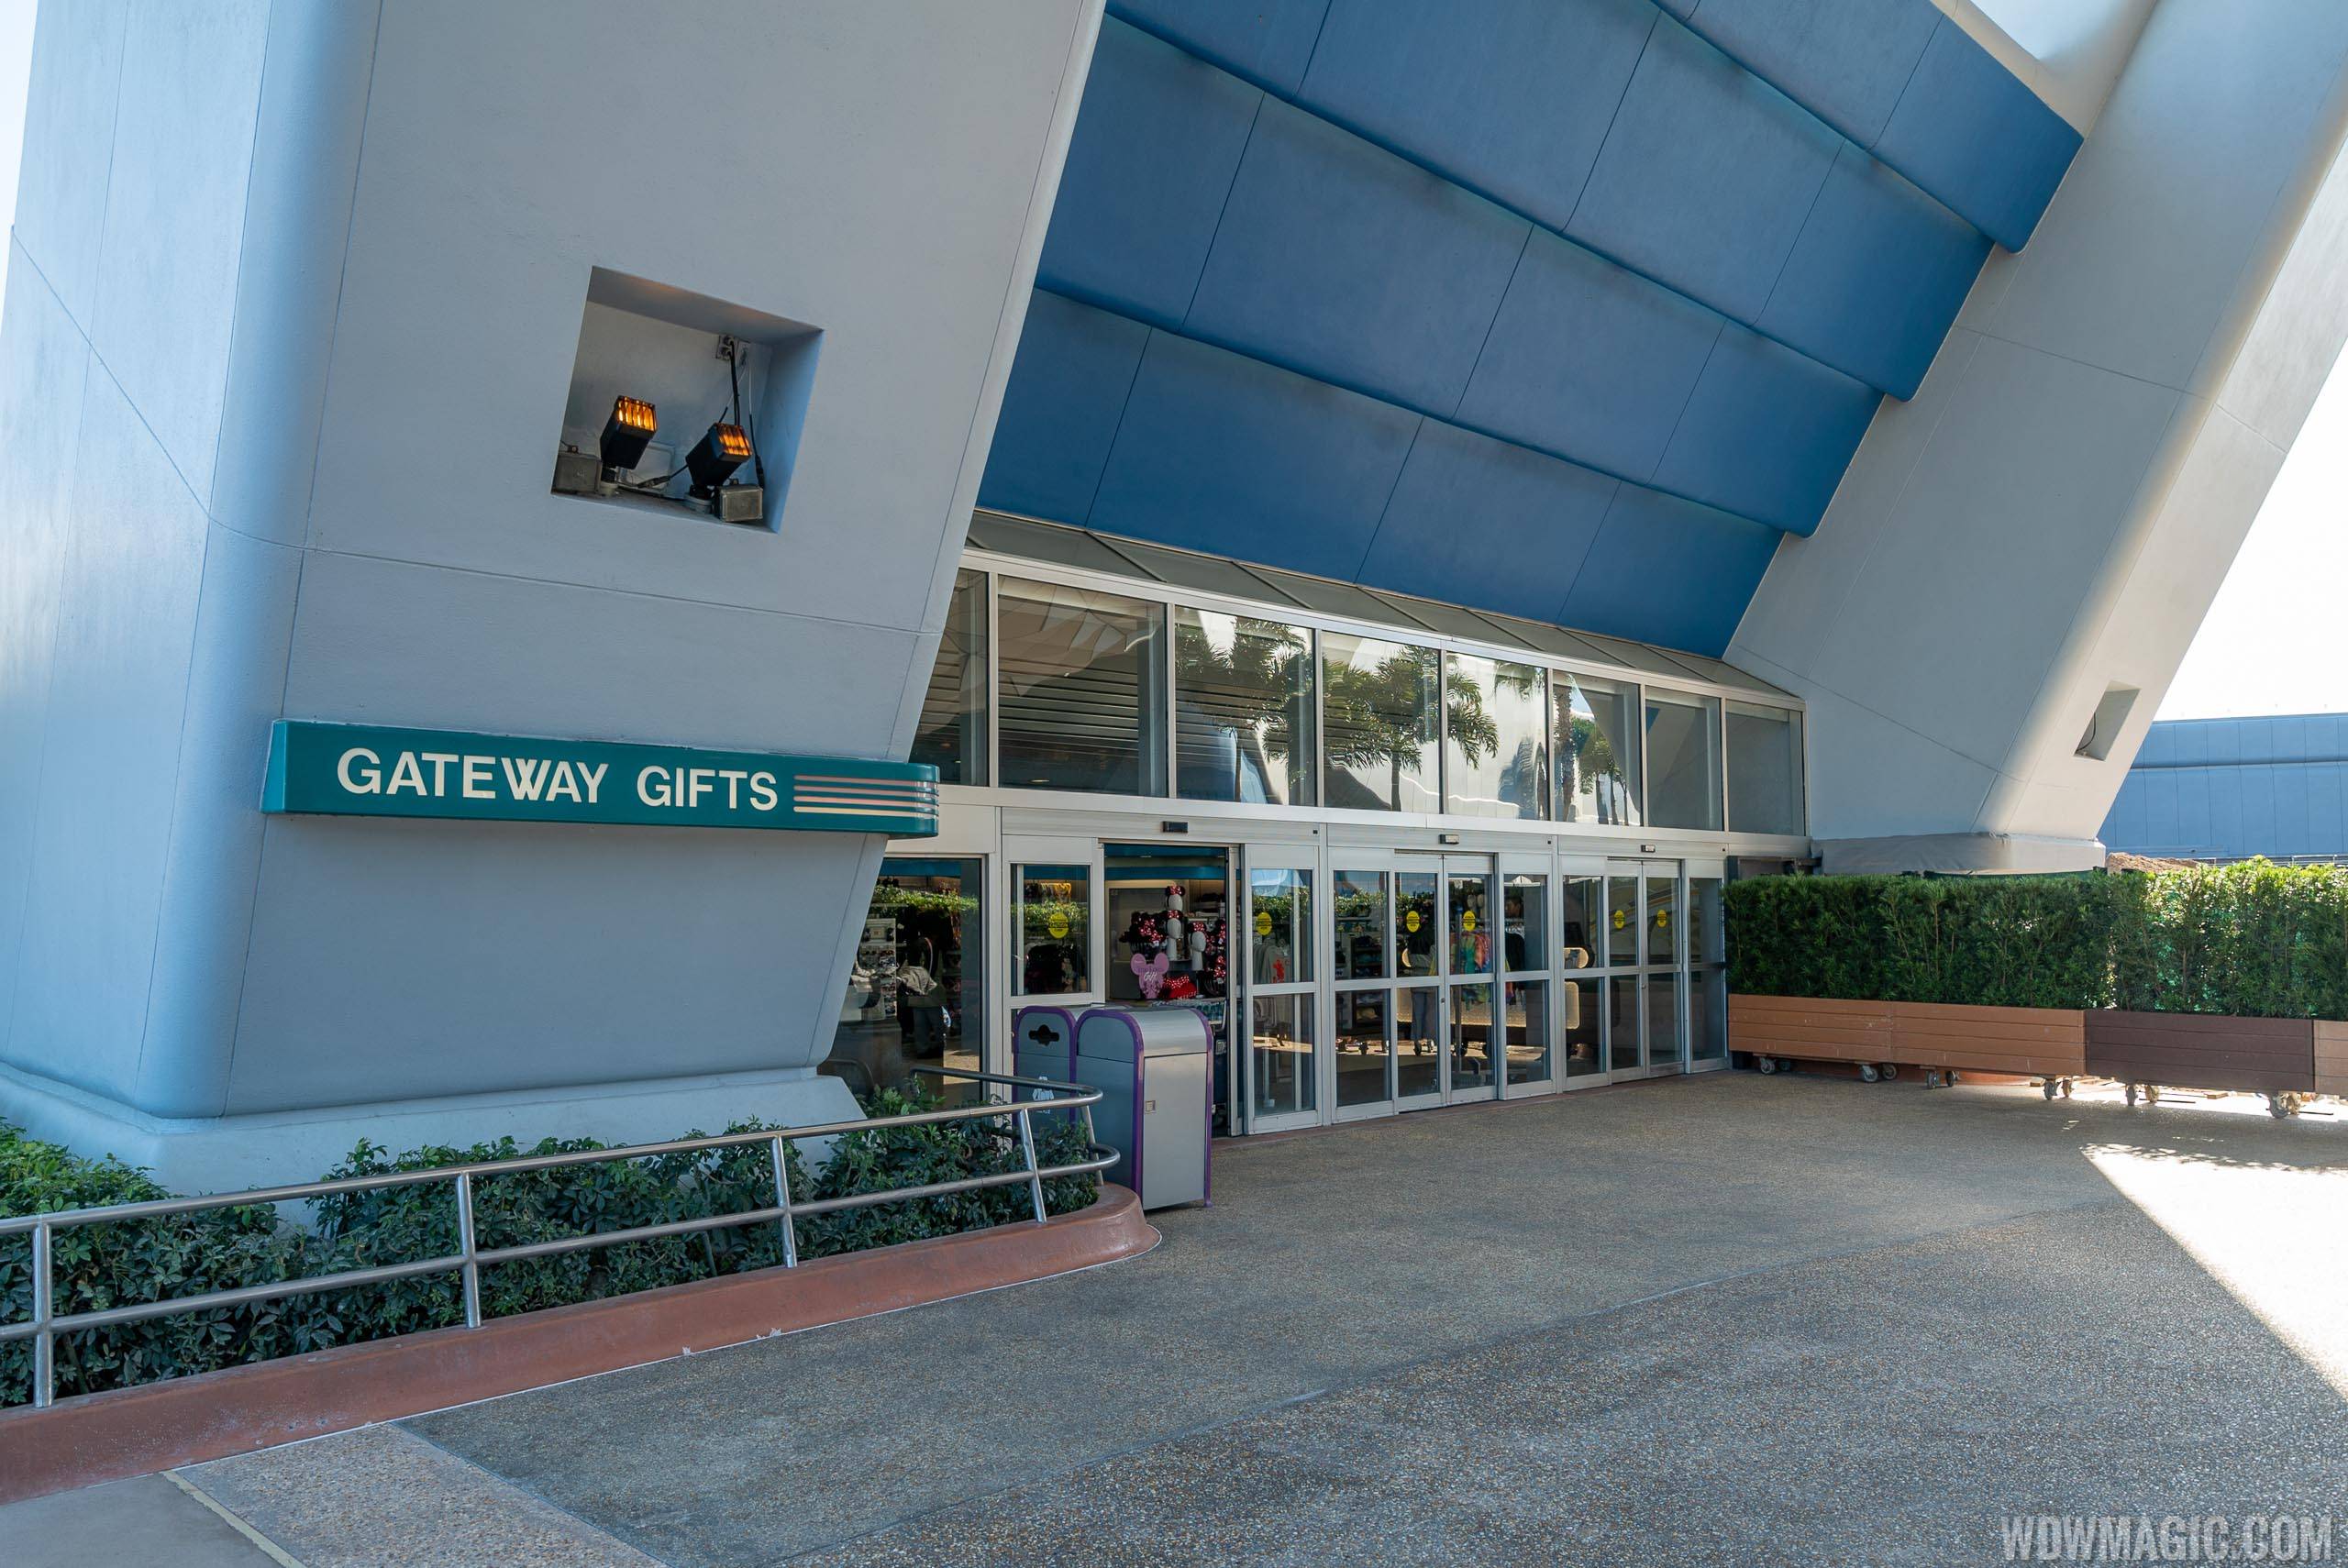 The original Gateway Gifts sign